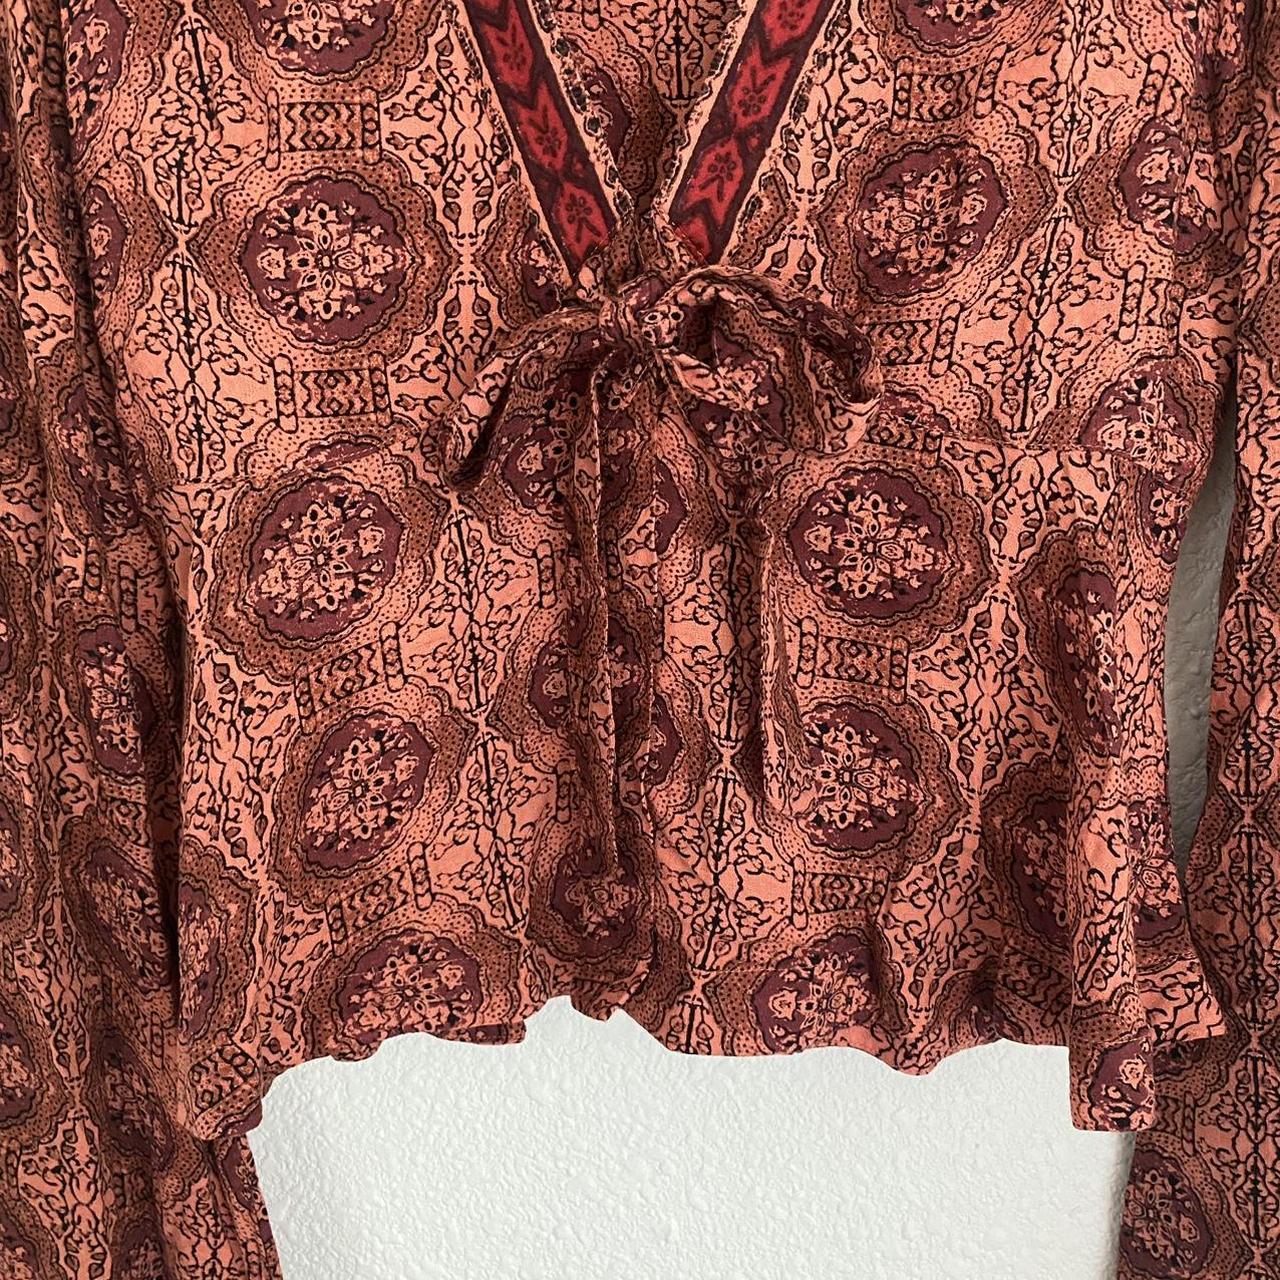 Free People Women's Pink and Burgundy Blouse (4)